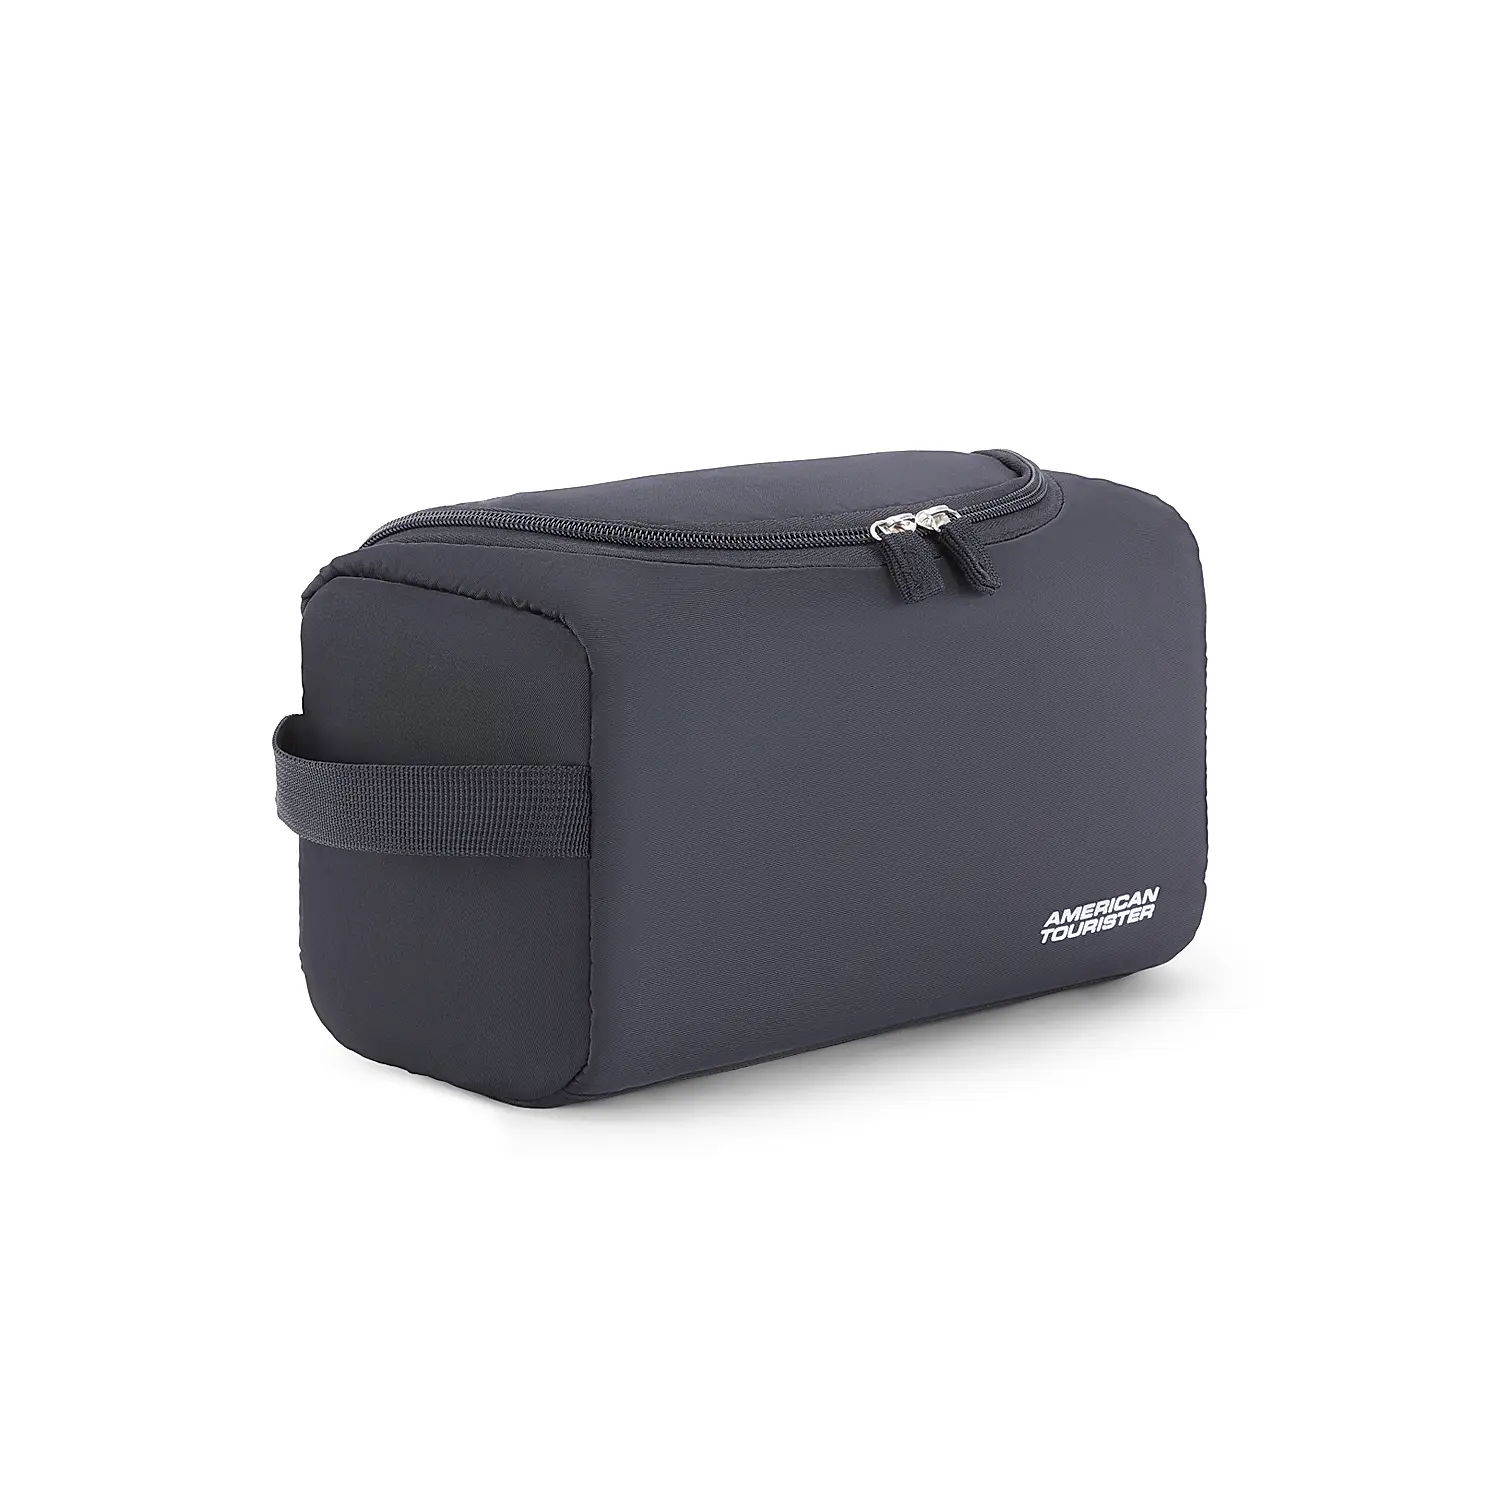 10 Best American Tourister Toiletry Bag for 2023 | TouristSecrets